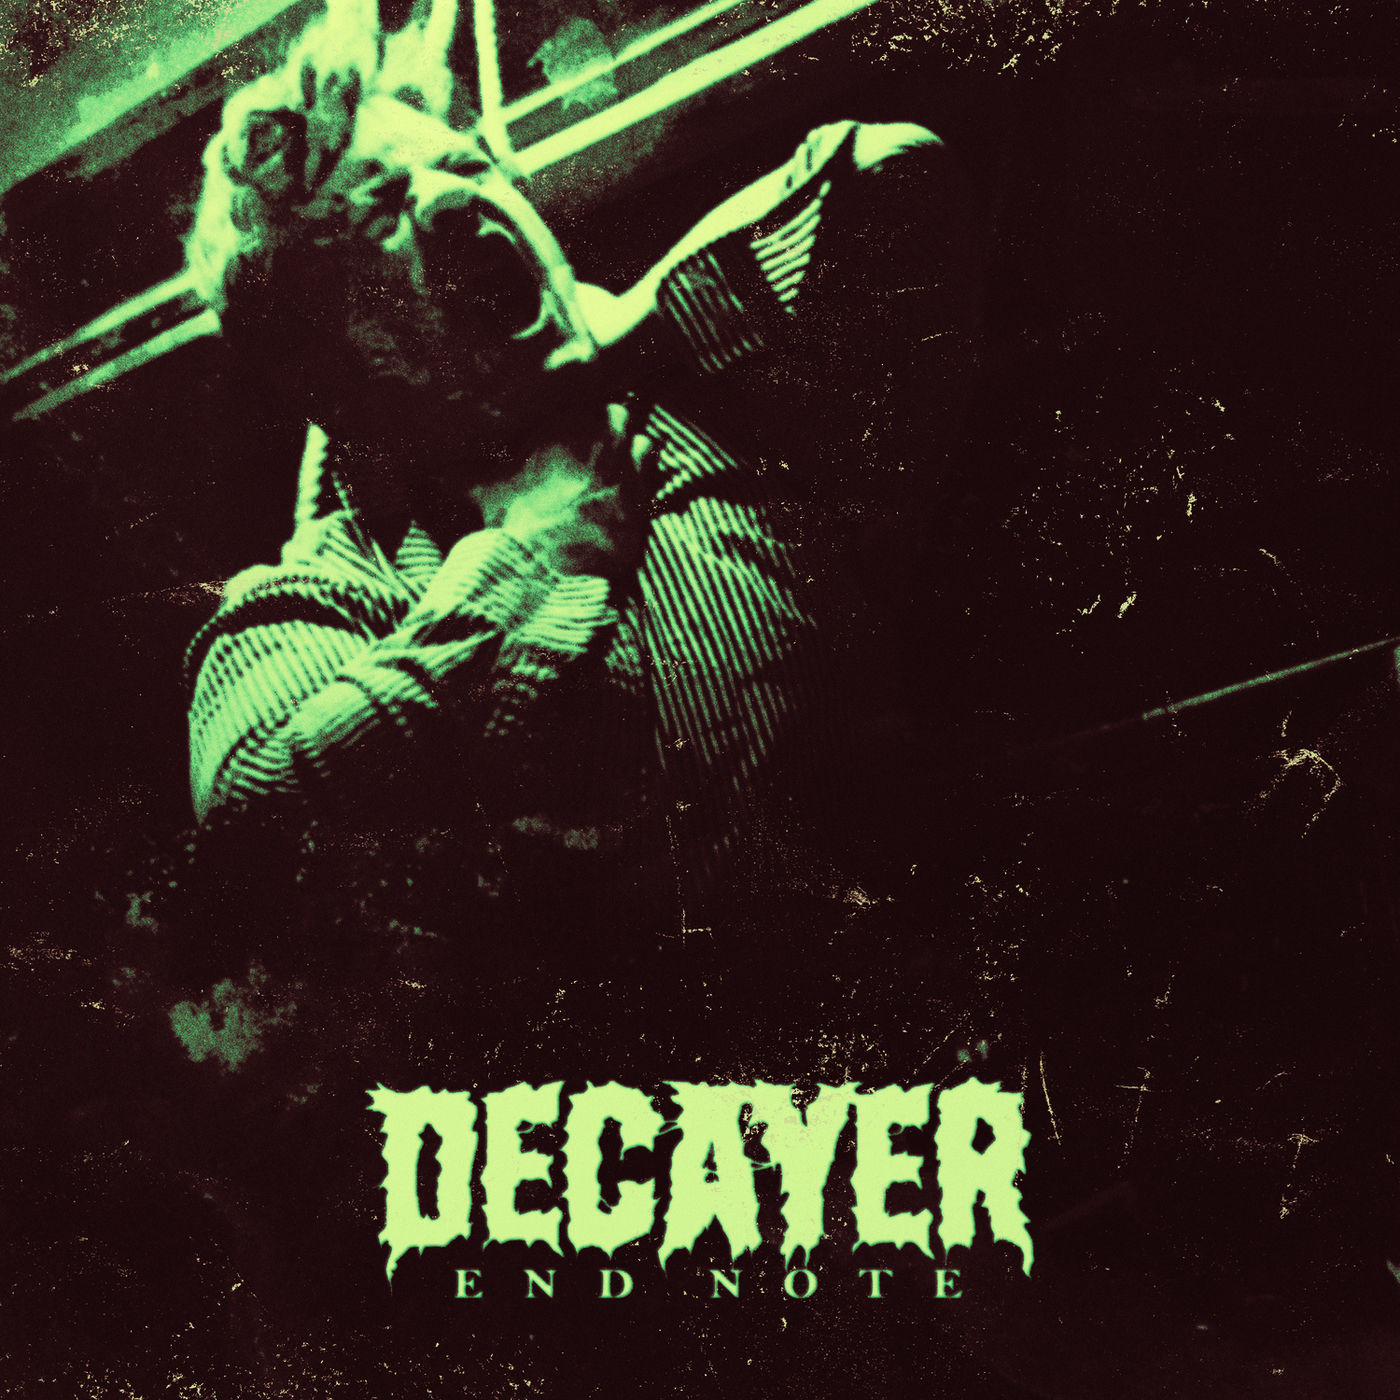 Decayer - End Note (2019)